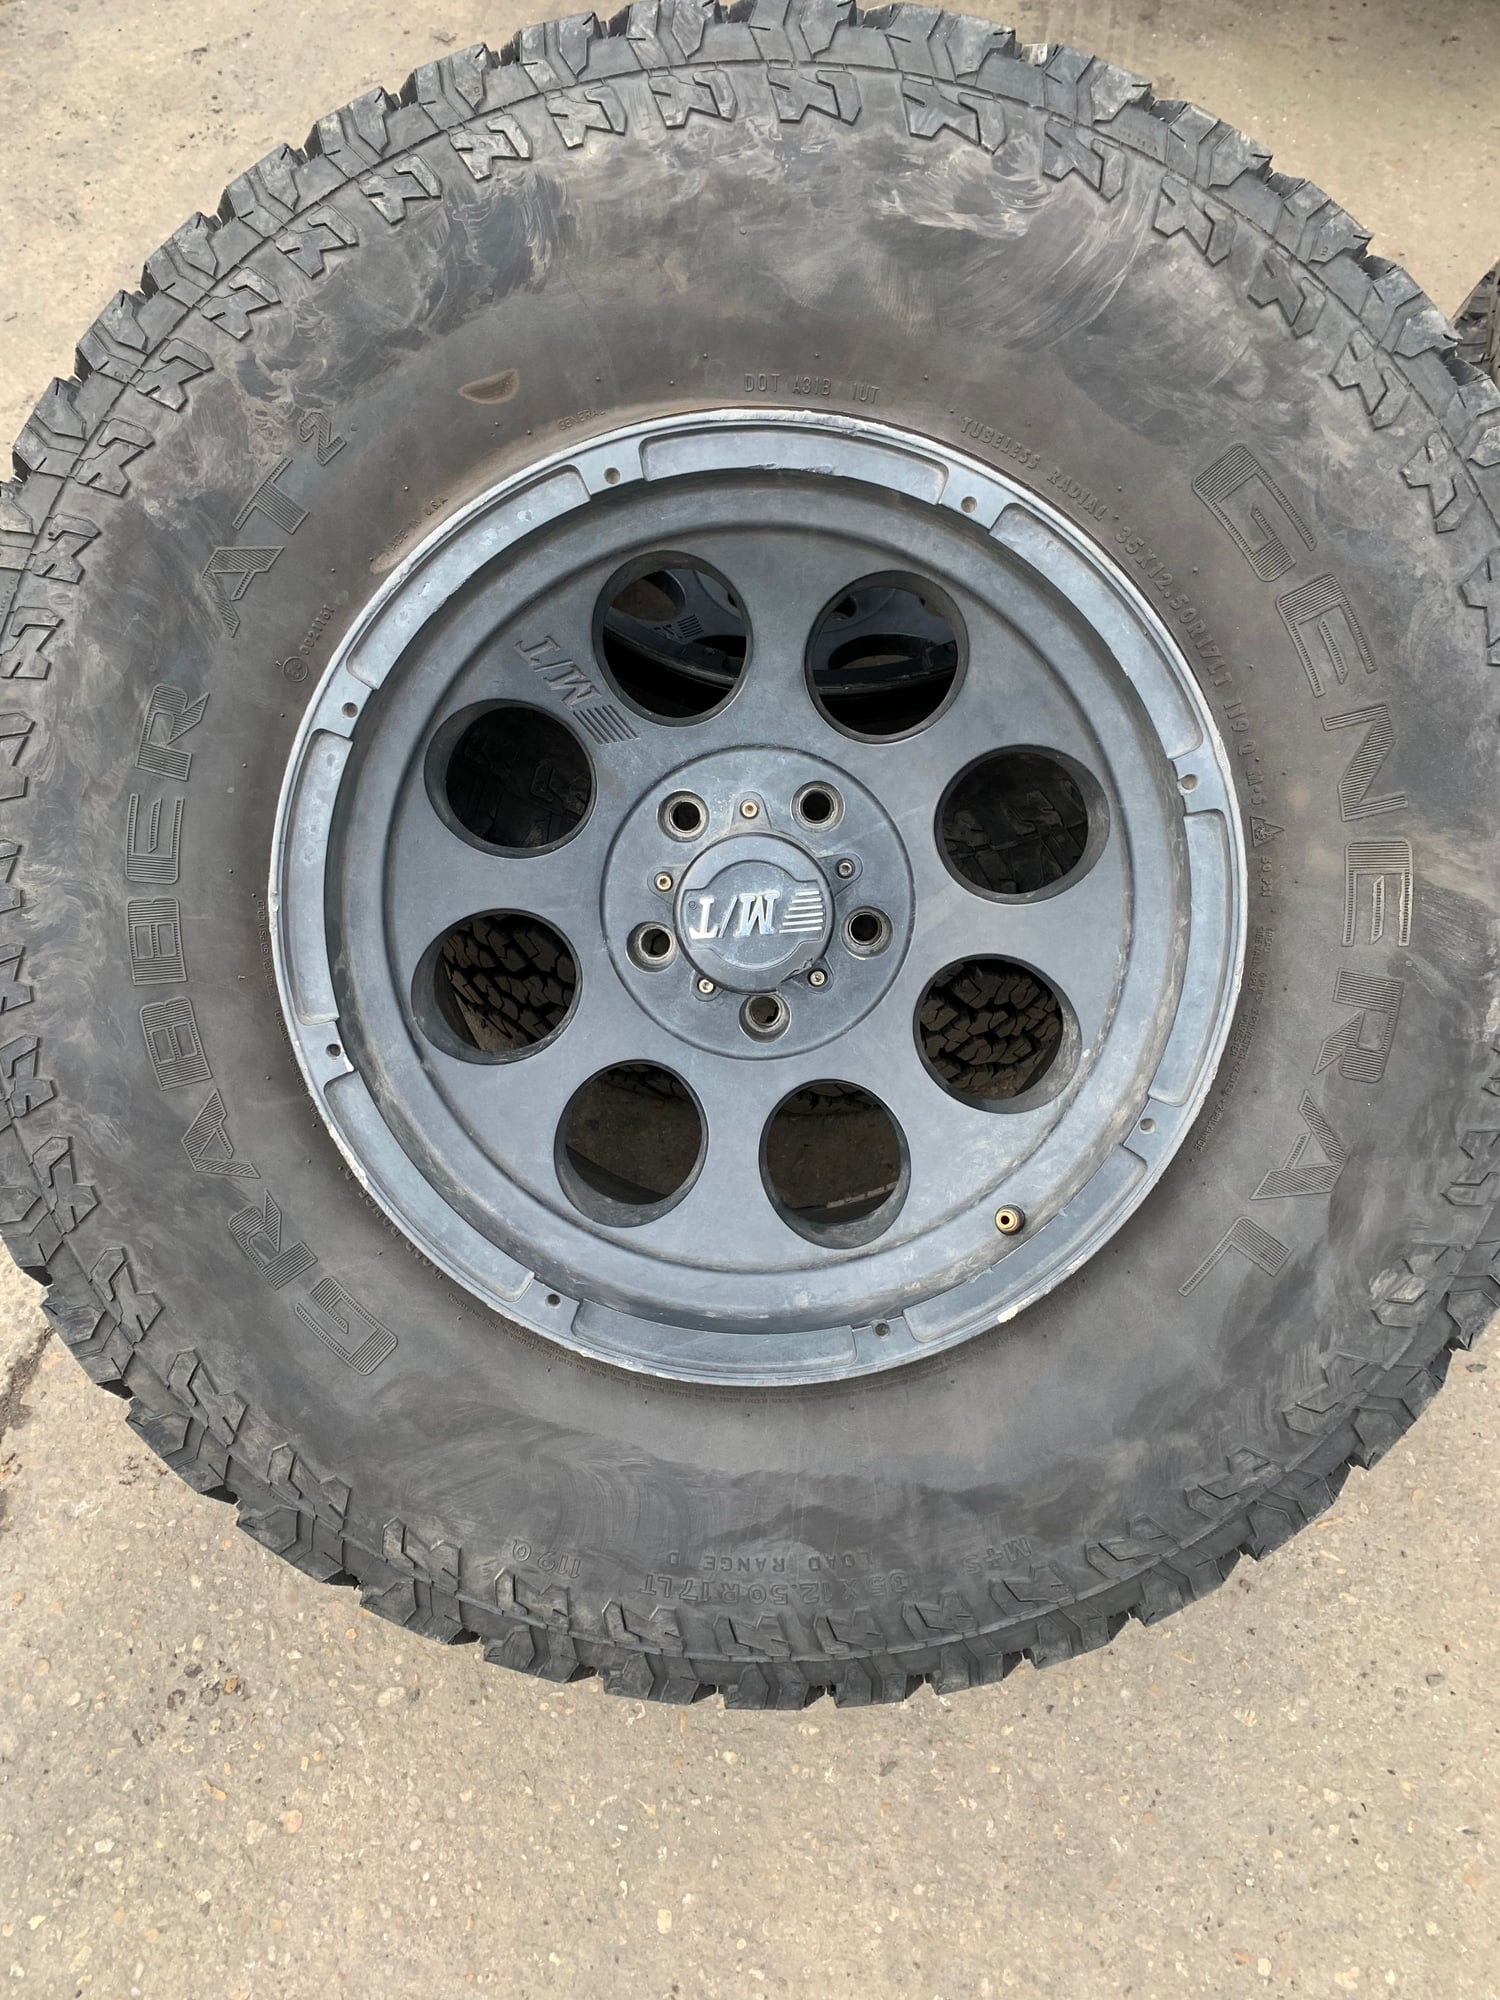 Wheels and Tires/Axles - M/T wheels and 35s general Grabber - Used - 2007 to 2017 Jeep Wrangler - Fernedale, MD 21061, United States